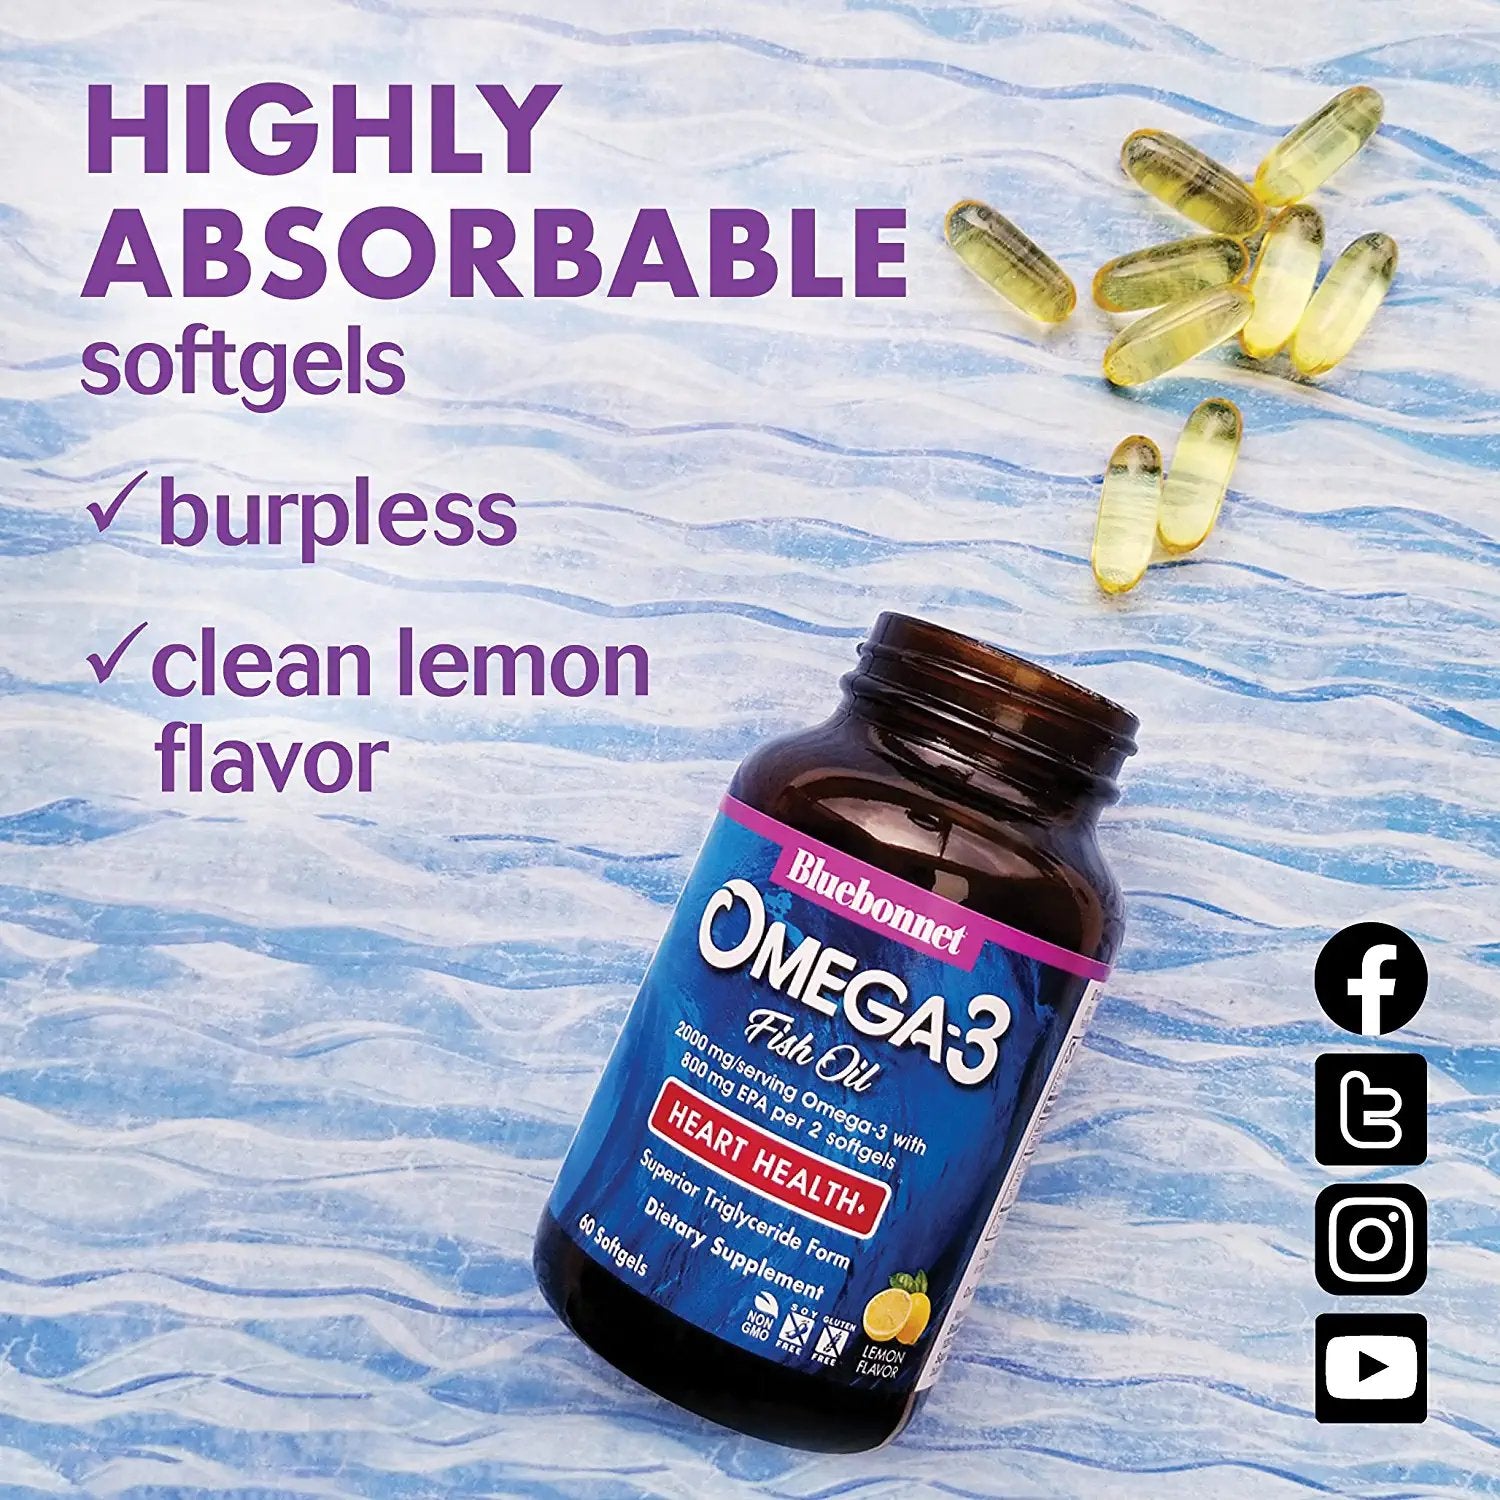 Bluebonnet Nutrition Omega-3 Heart Formula Natural Wild Caught Triglyceride Form DHA 600 mg EPA 800 mg - Highly Concentrated Cardiovascular Health Support Supplement - Gluten-Free - 120 Softgel